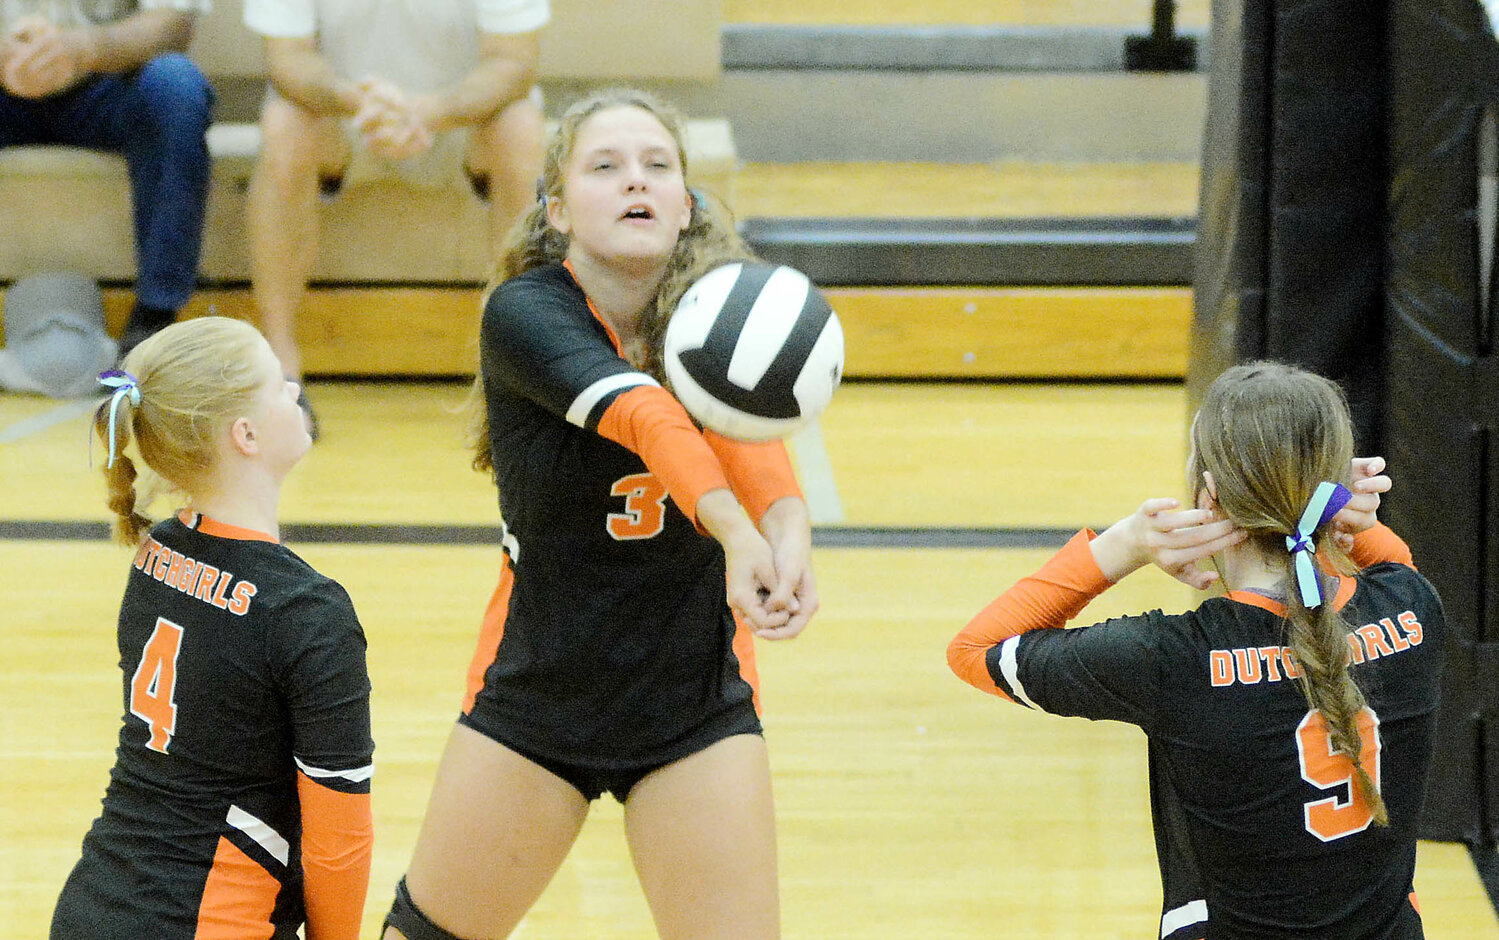 Ayla Schmanke (center) bumps the volleyball while Dutchgirl teammates Liz Adams (left) and Mya Vandegriffe (9) converge on the play Monday night during home volleyball action at Owensville High School against Rolla.